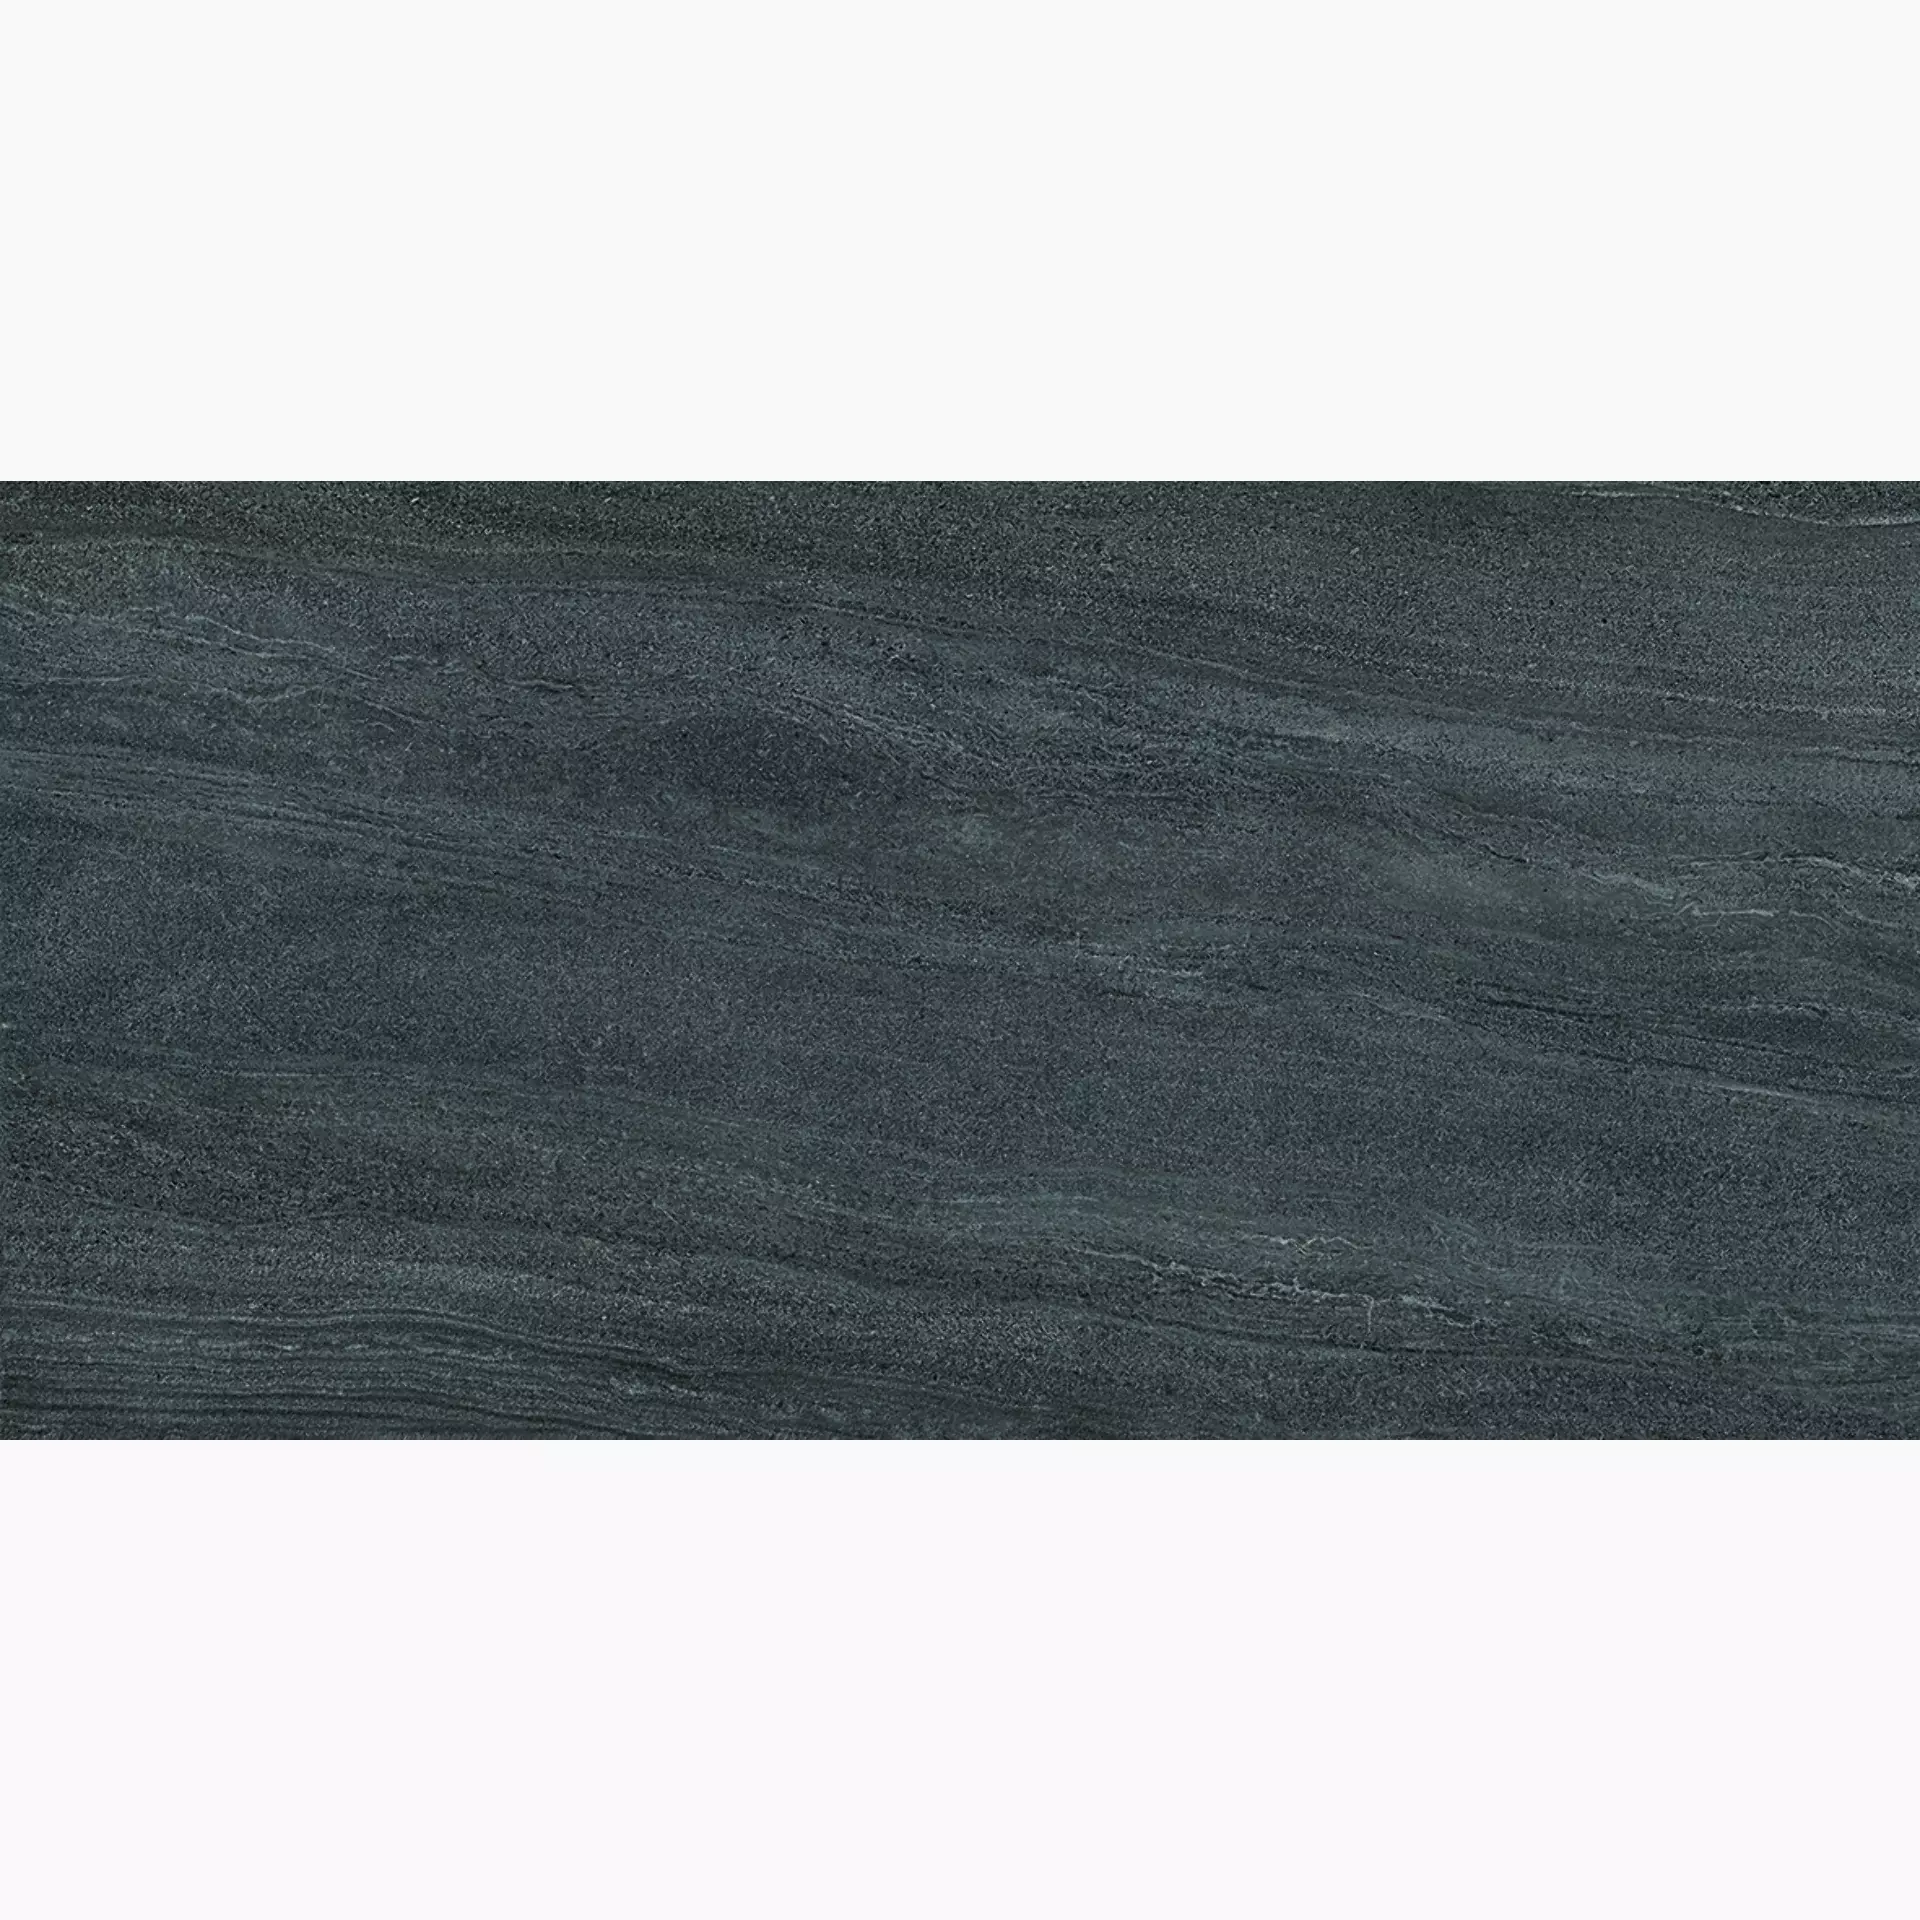 Ergon Elegance Pro Anthracite Naturale EJZ1 60x120cm rectified 9,5mm